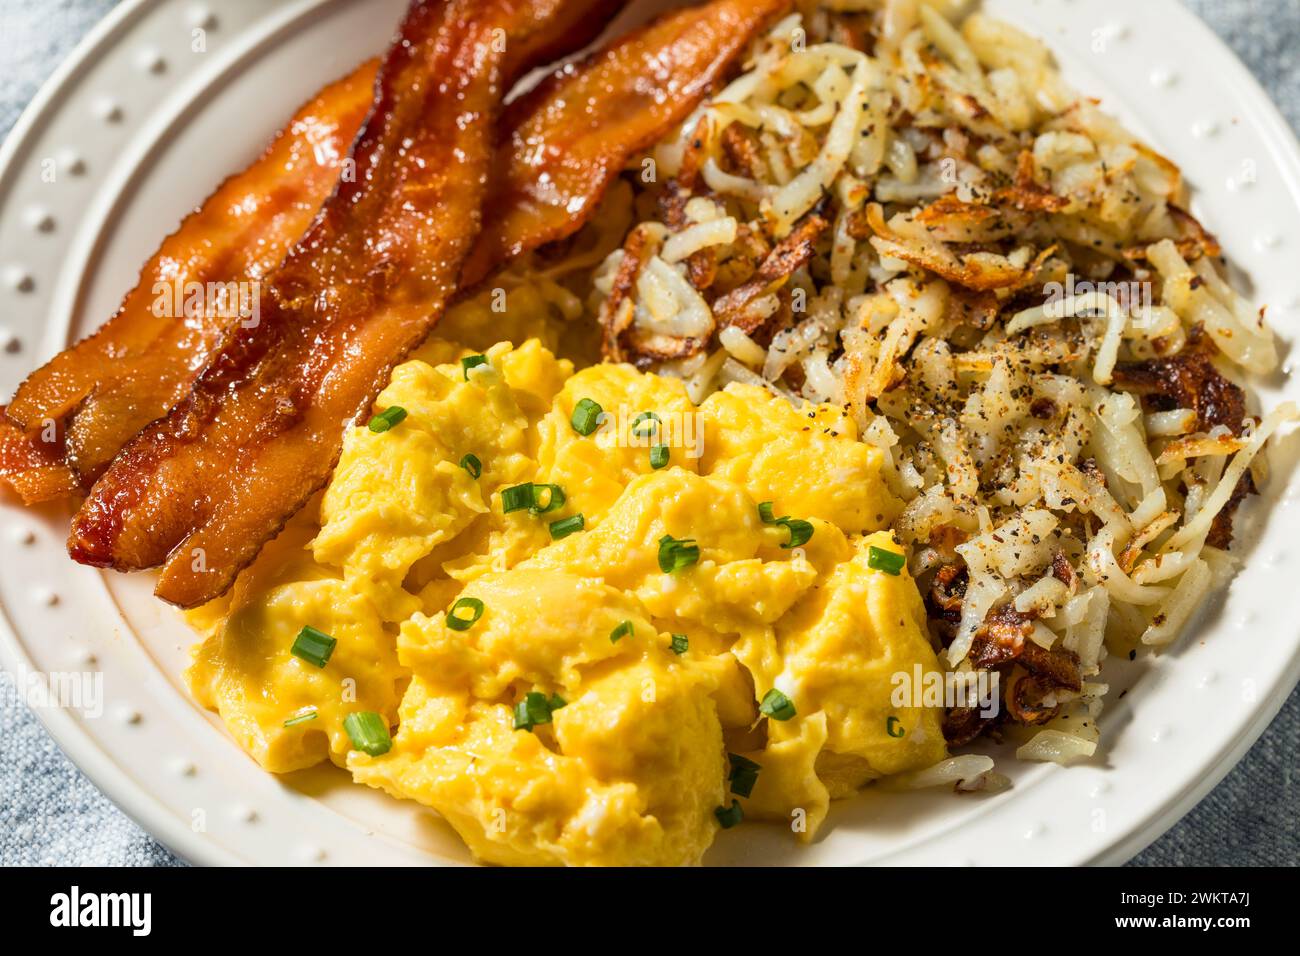 Healthy Homemade American Bacon Egg and Hashbrown Breakfast with Salt and Pepper Stock Photo